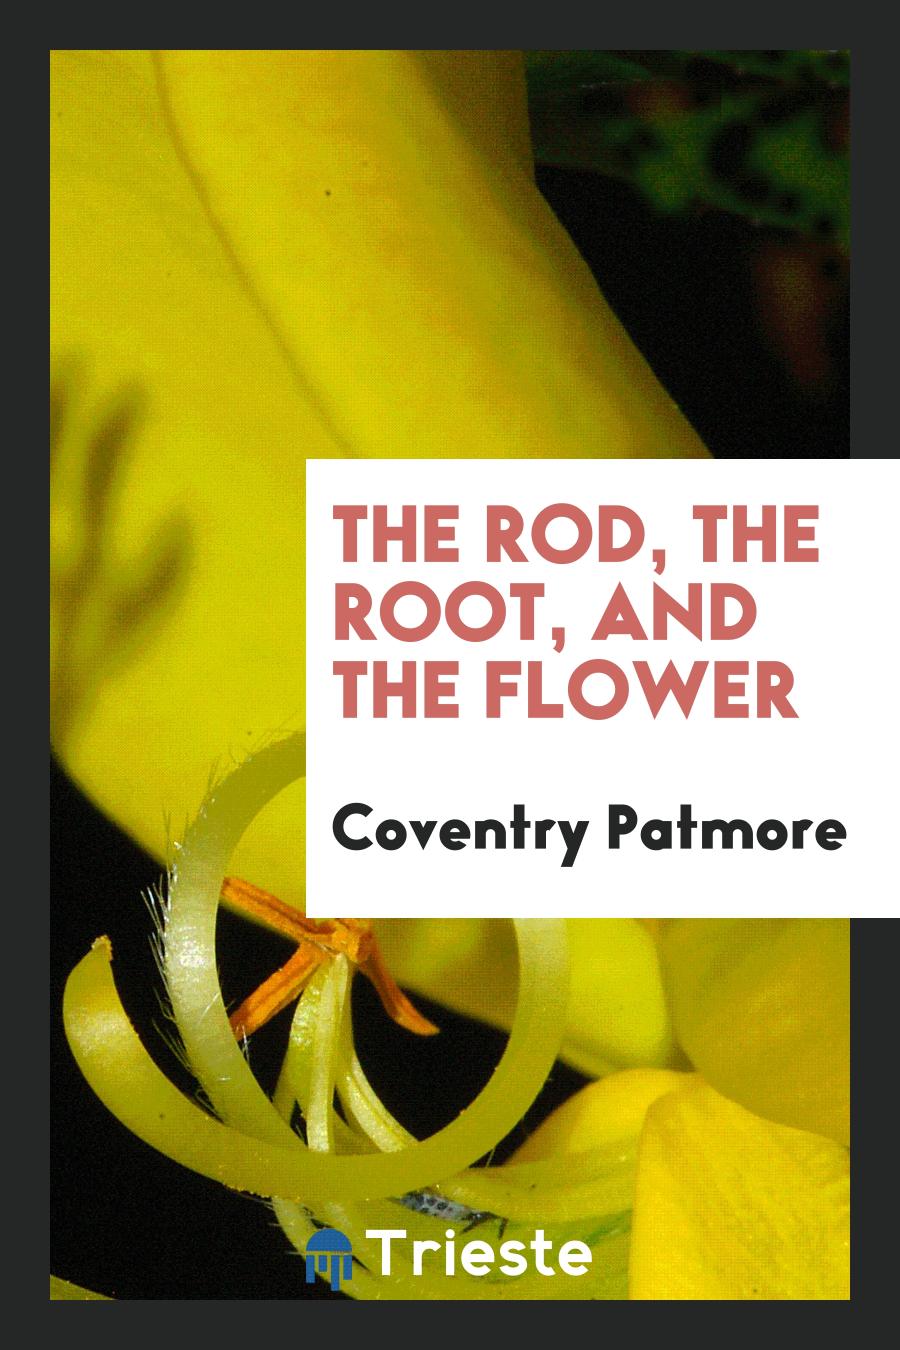 The rod, the root, and the flower